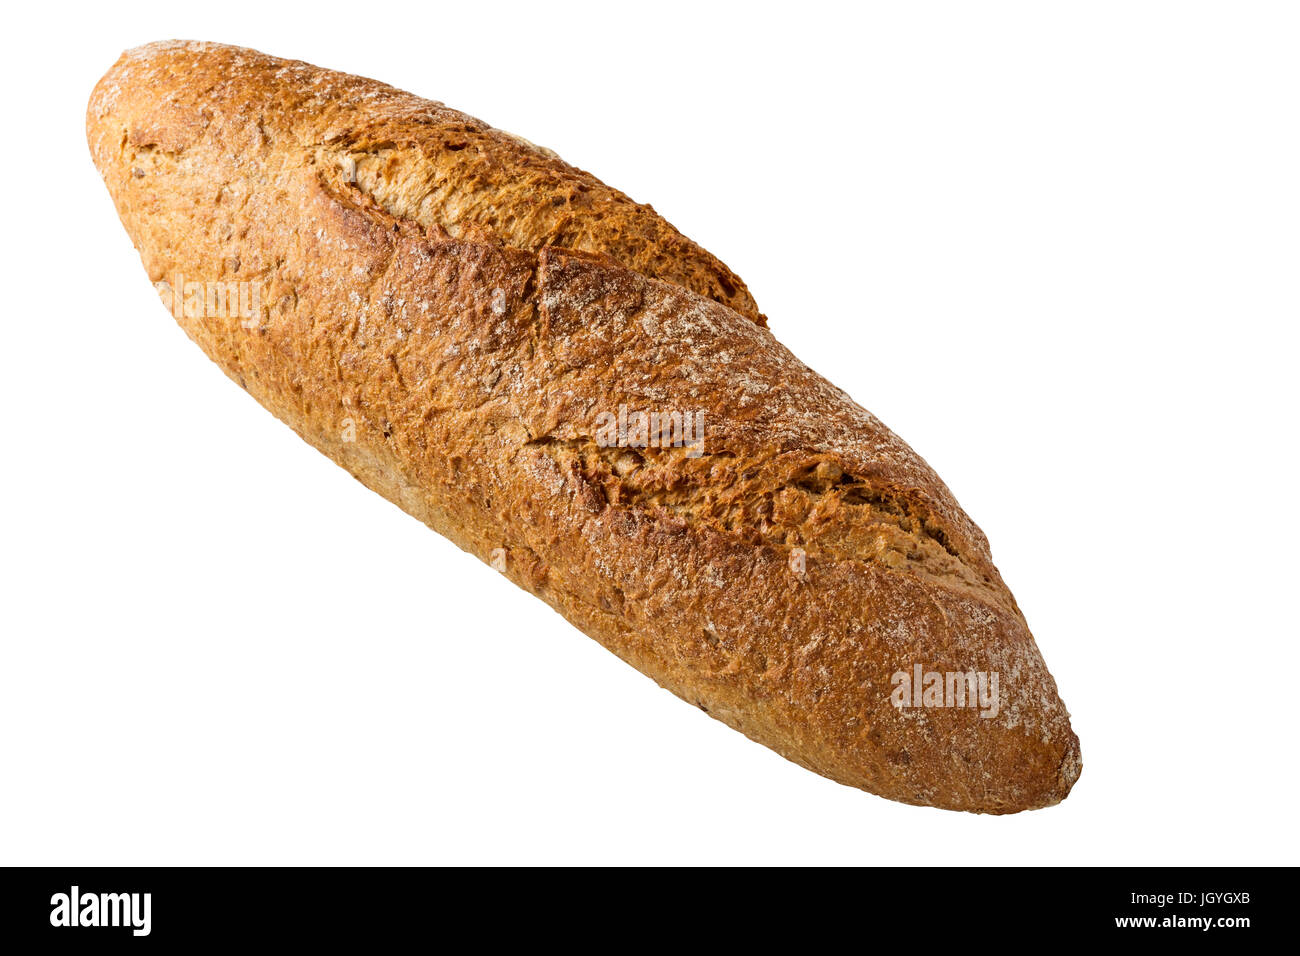 Brown baguette with different seeds, such as sesame and poppy, isolated on white background with clipping path Stock Photo